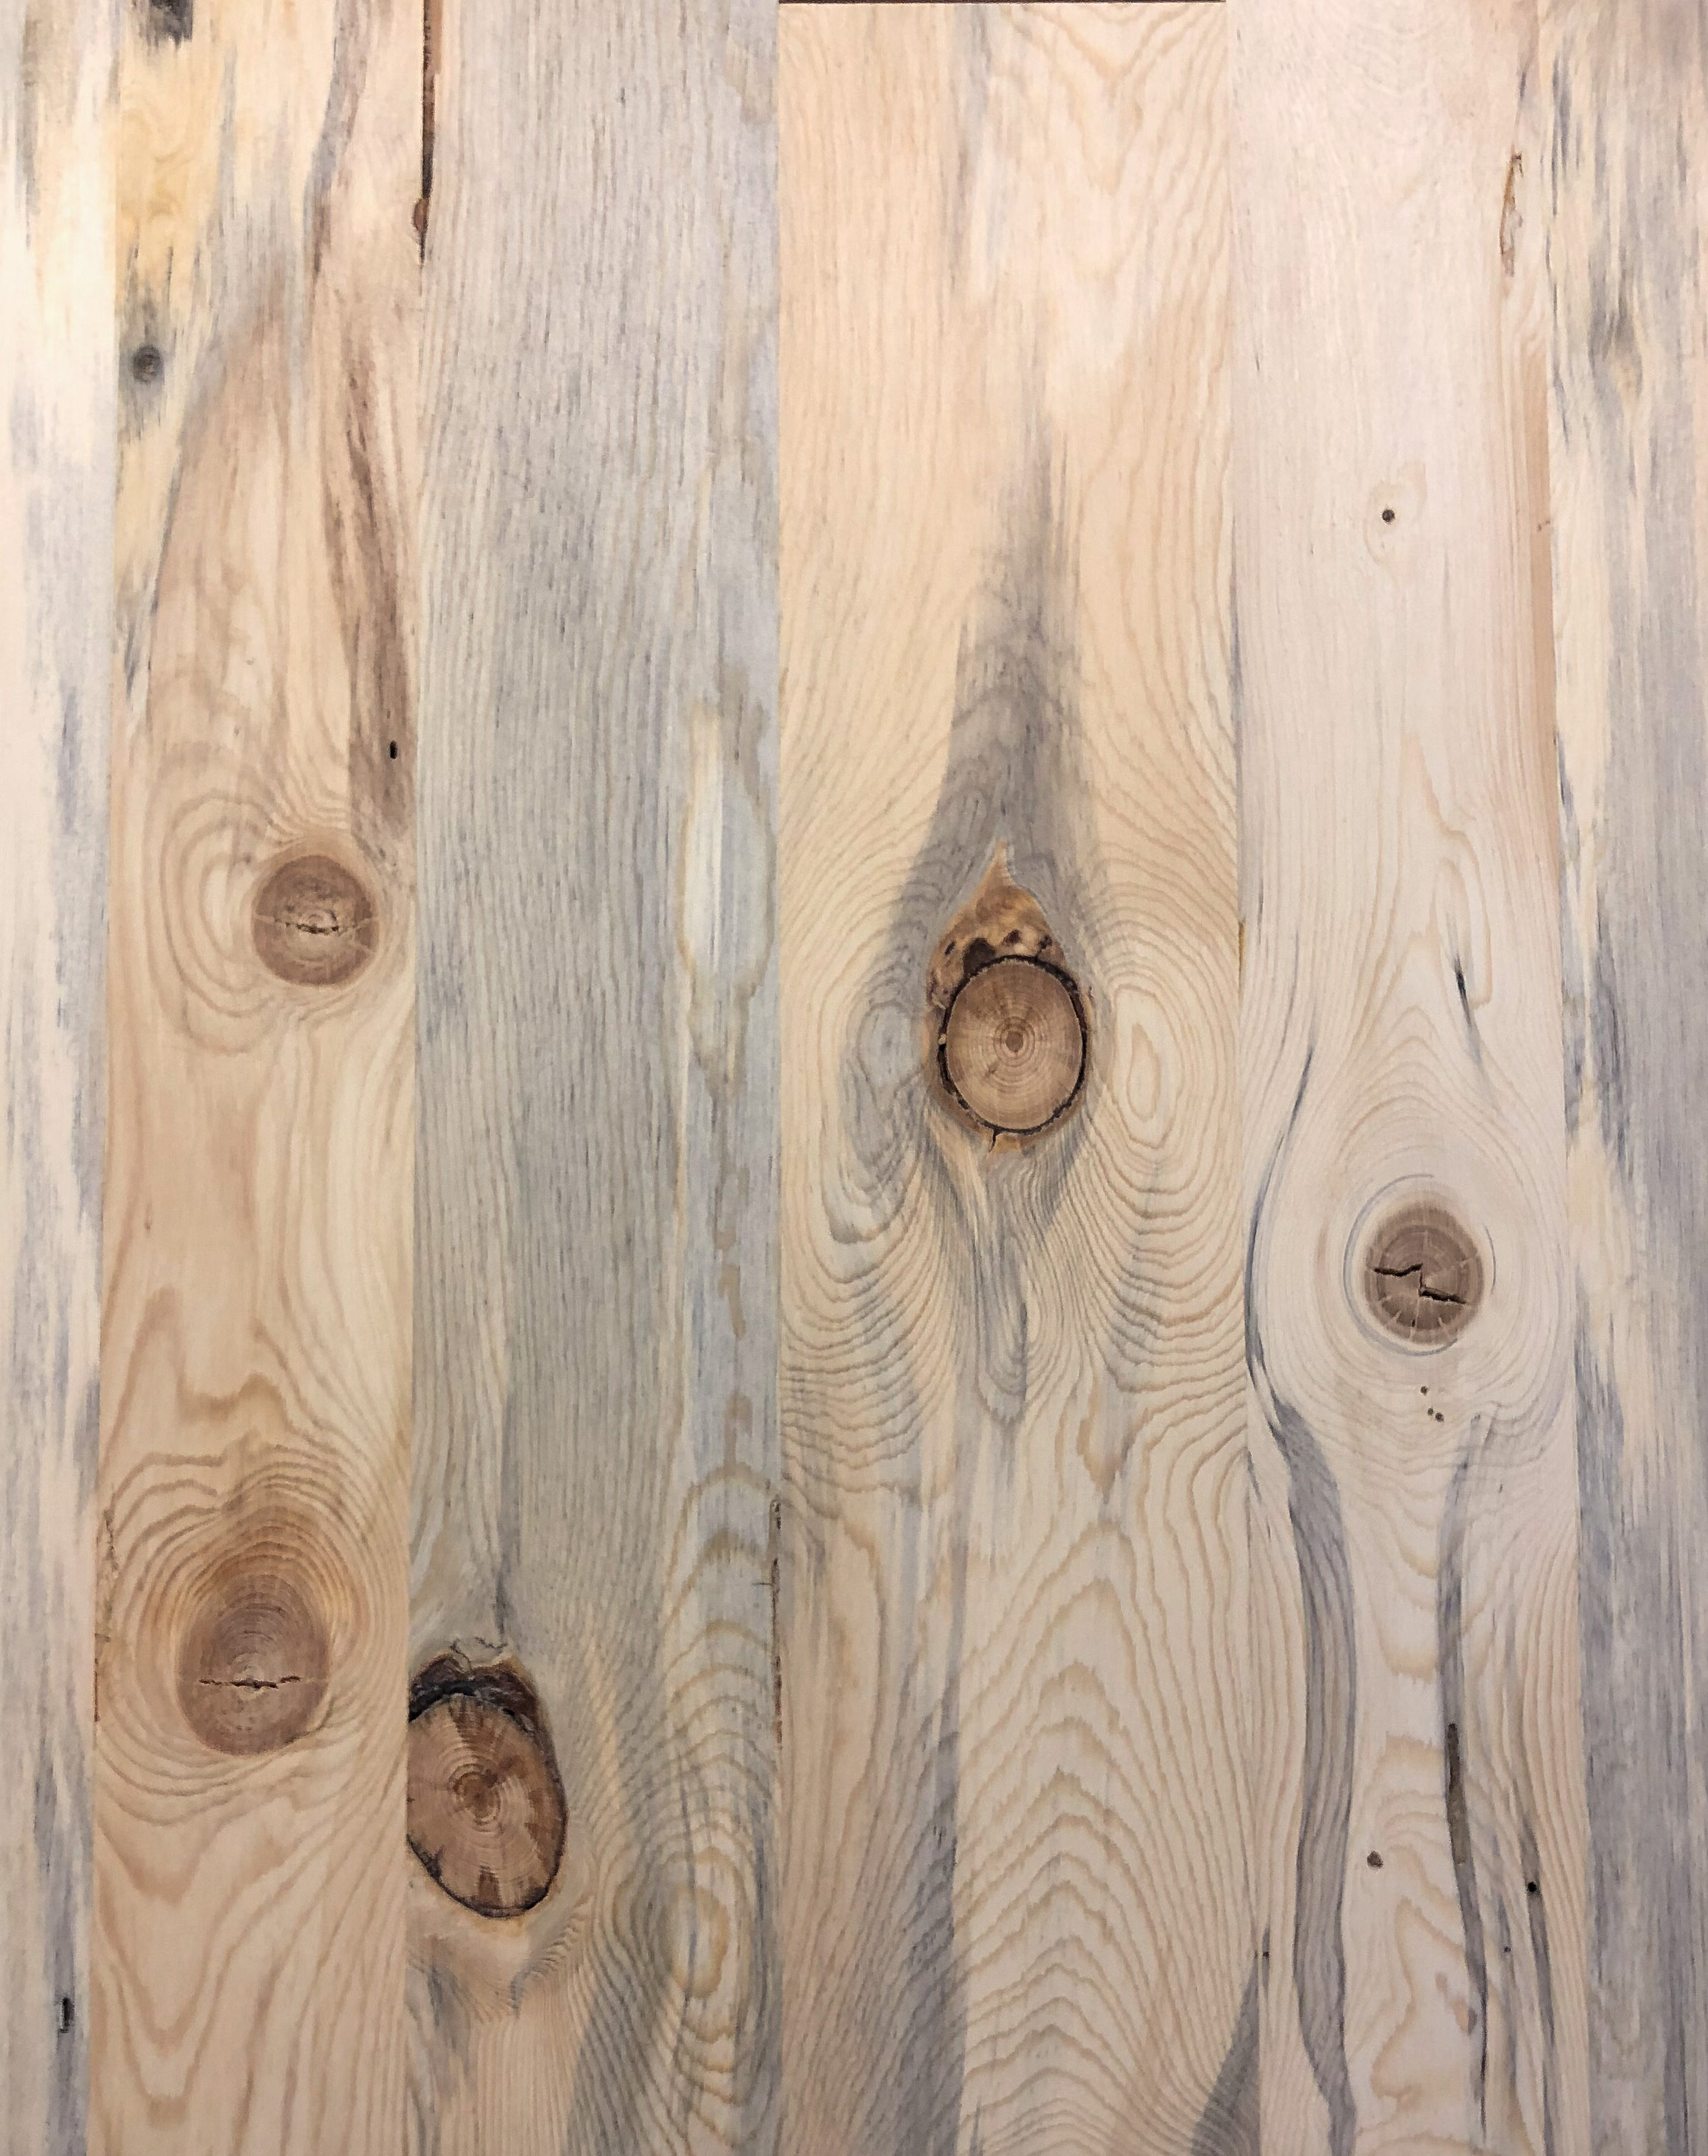 RBM - Spalted Aspen Wood Products